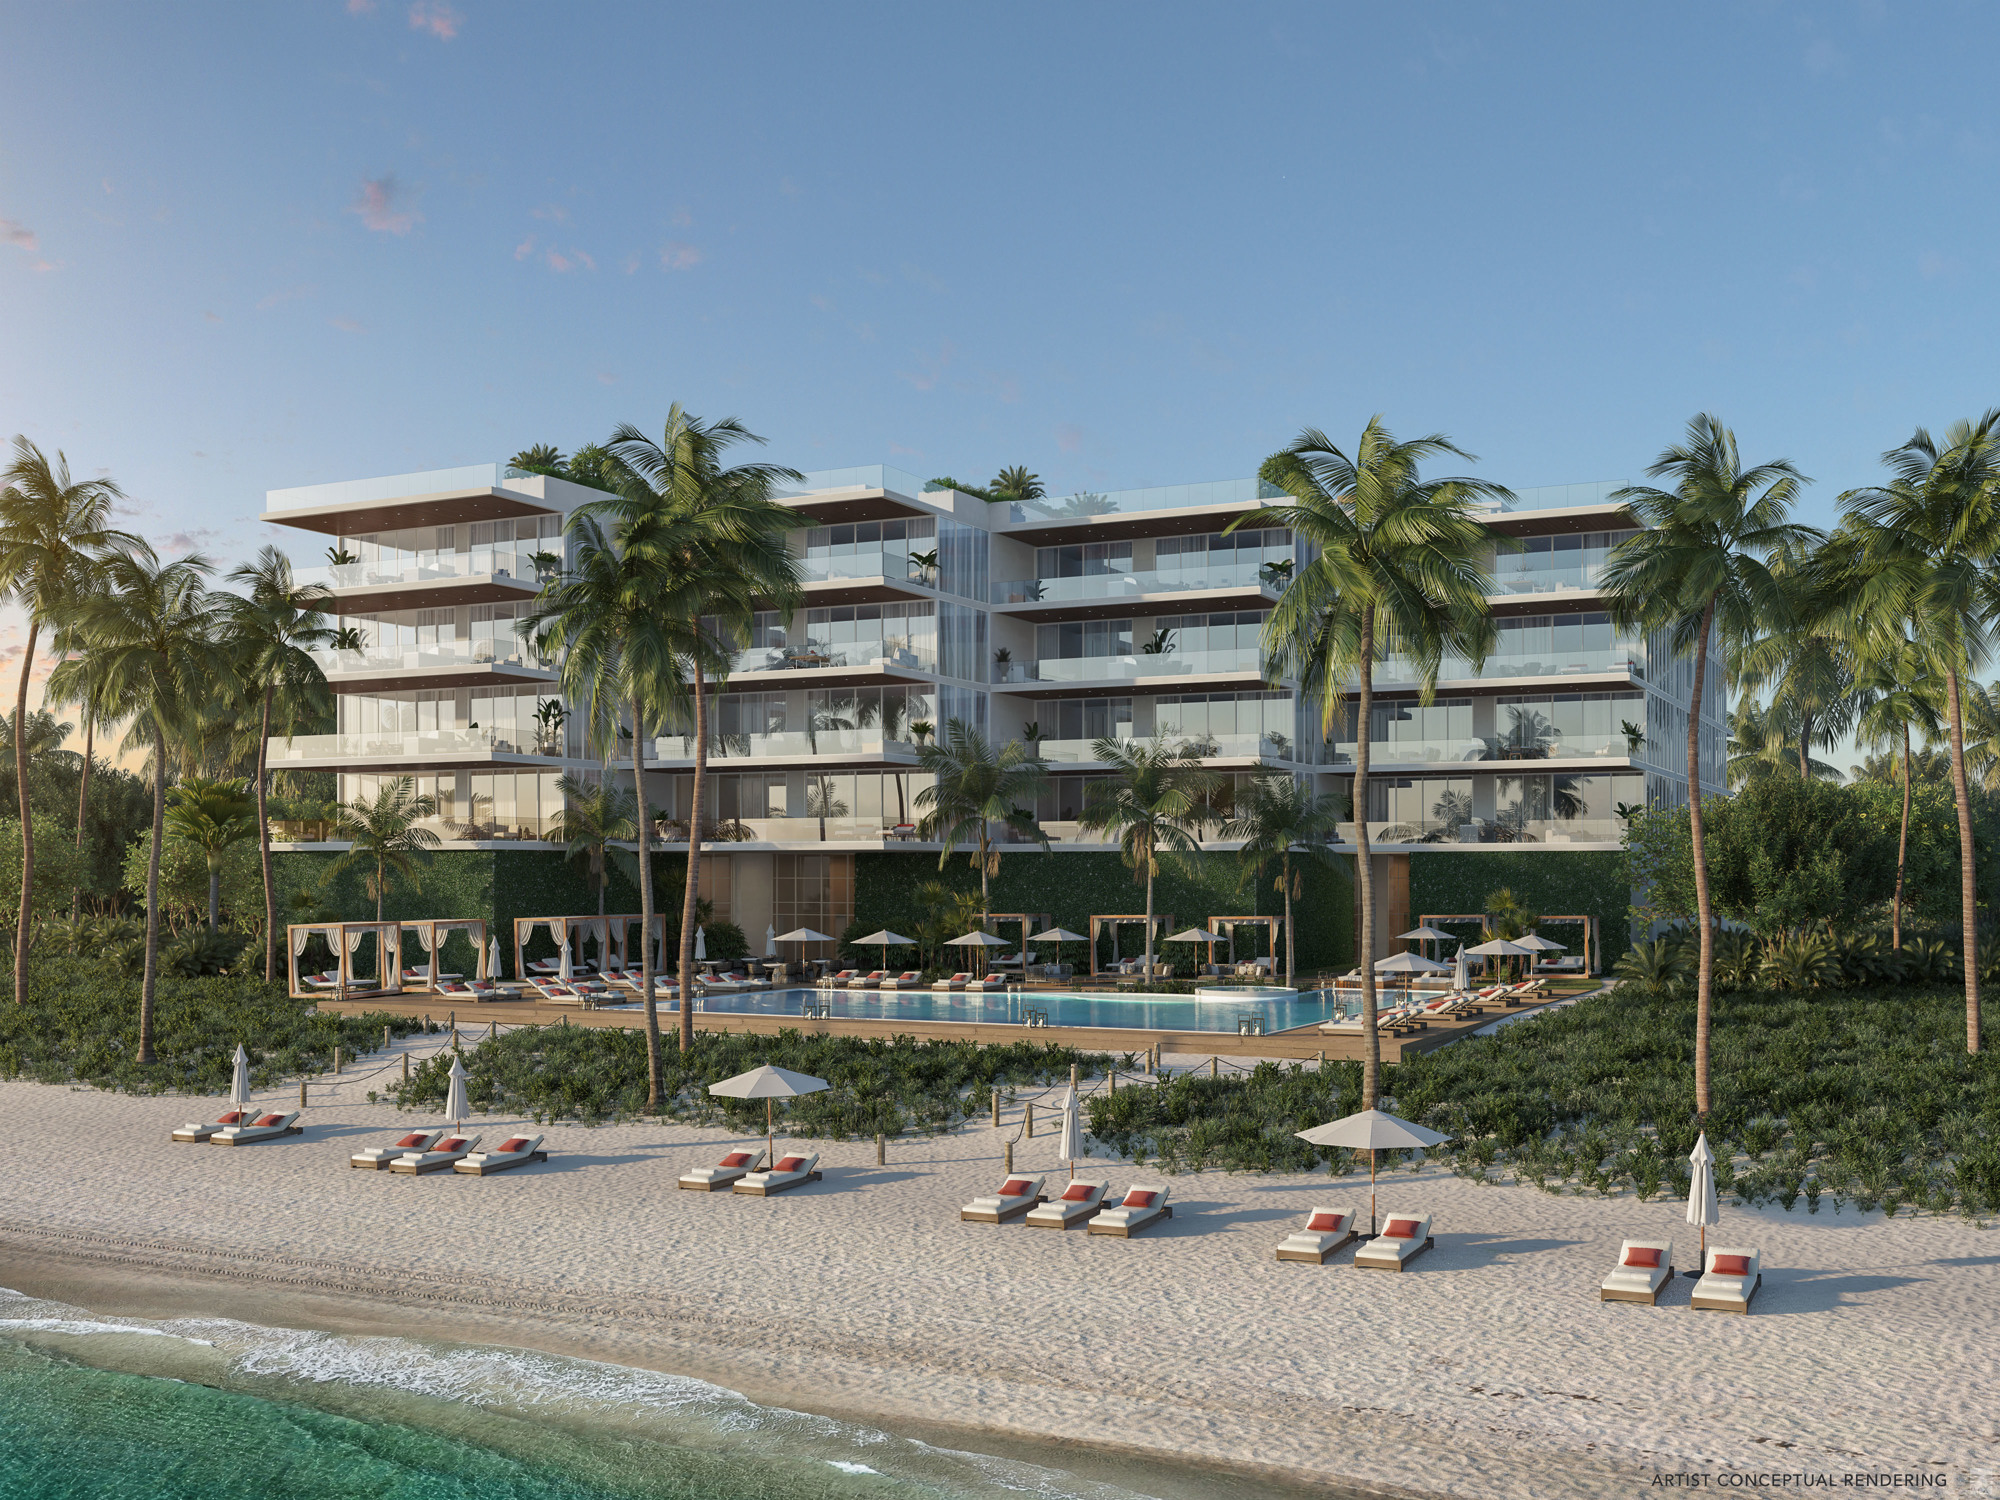 Here is a rendering of the proposed Sage Longboat Key condominium development at 4651 Gulf of Mexico Drive.